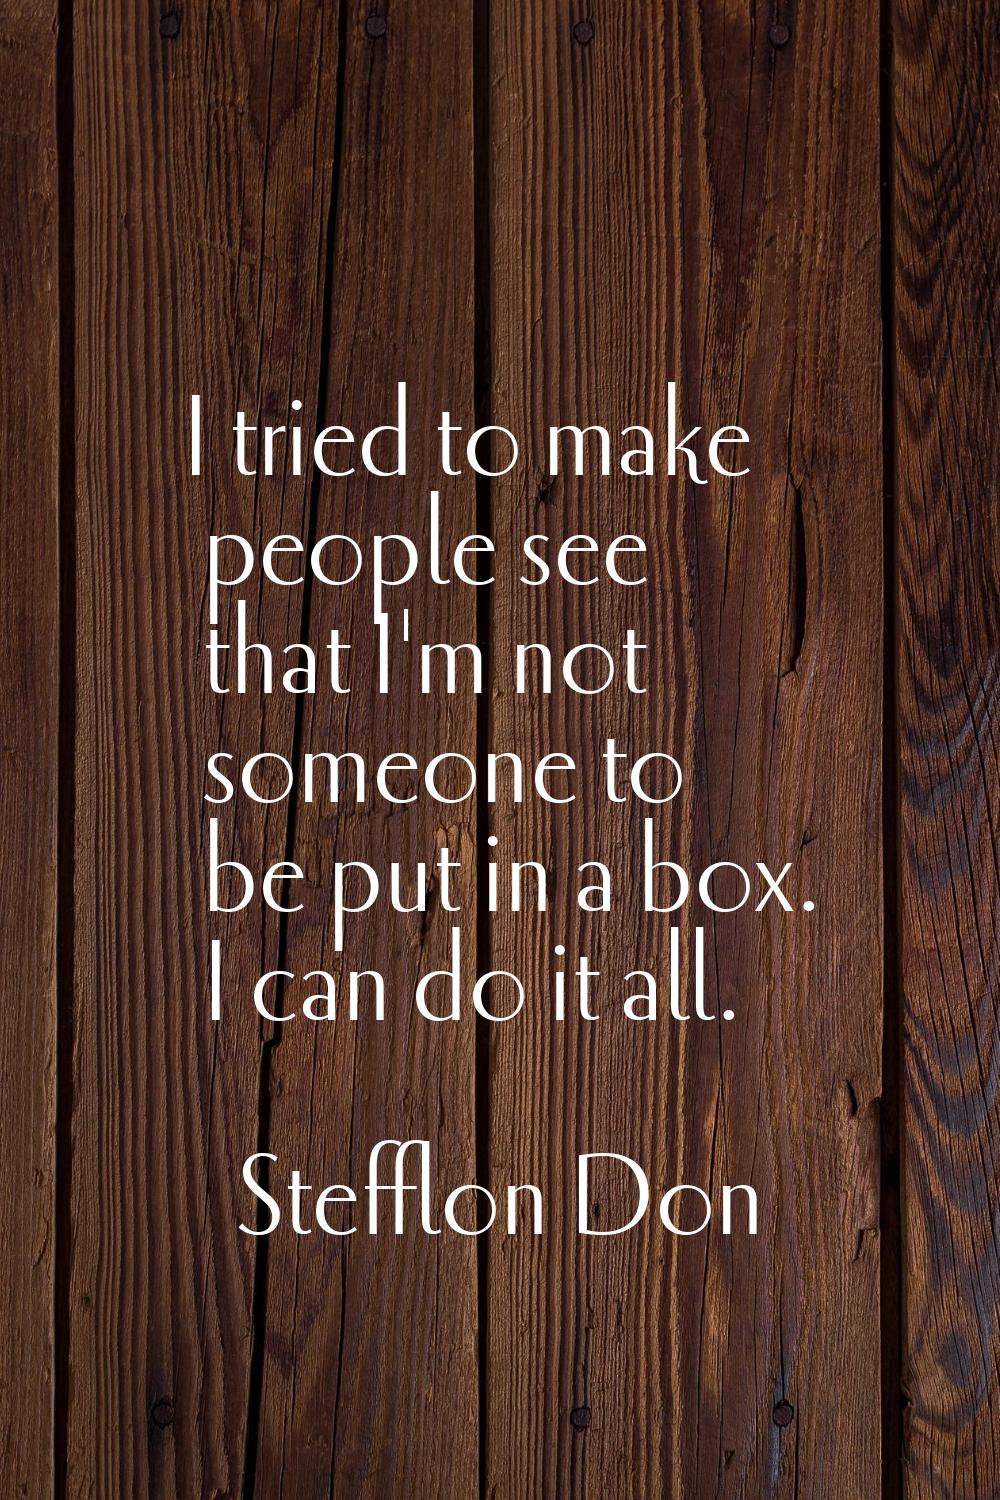 I tried to make people see that I'm not someone to be put in a box. I can do it all.